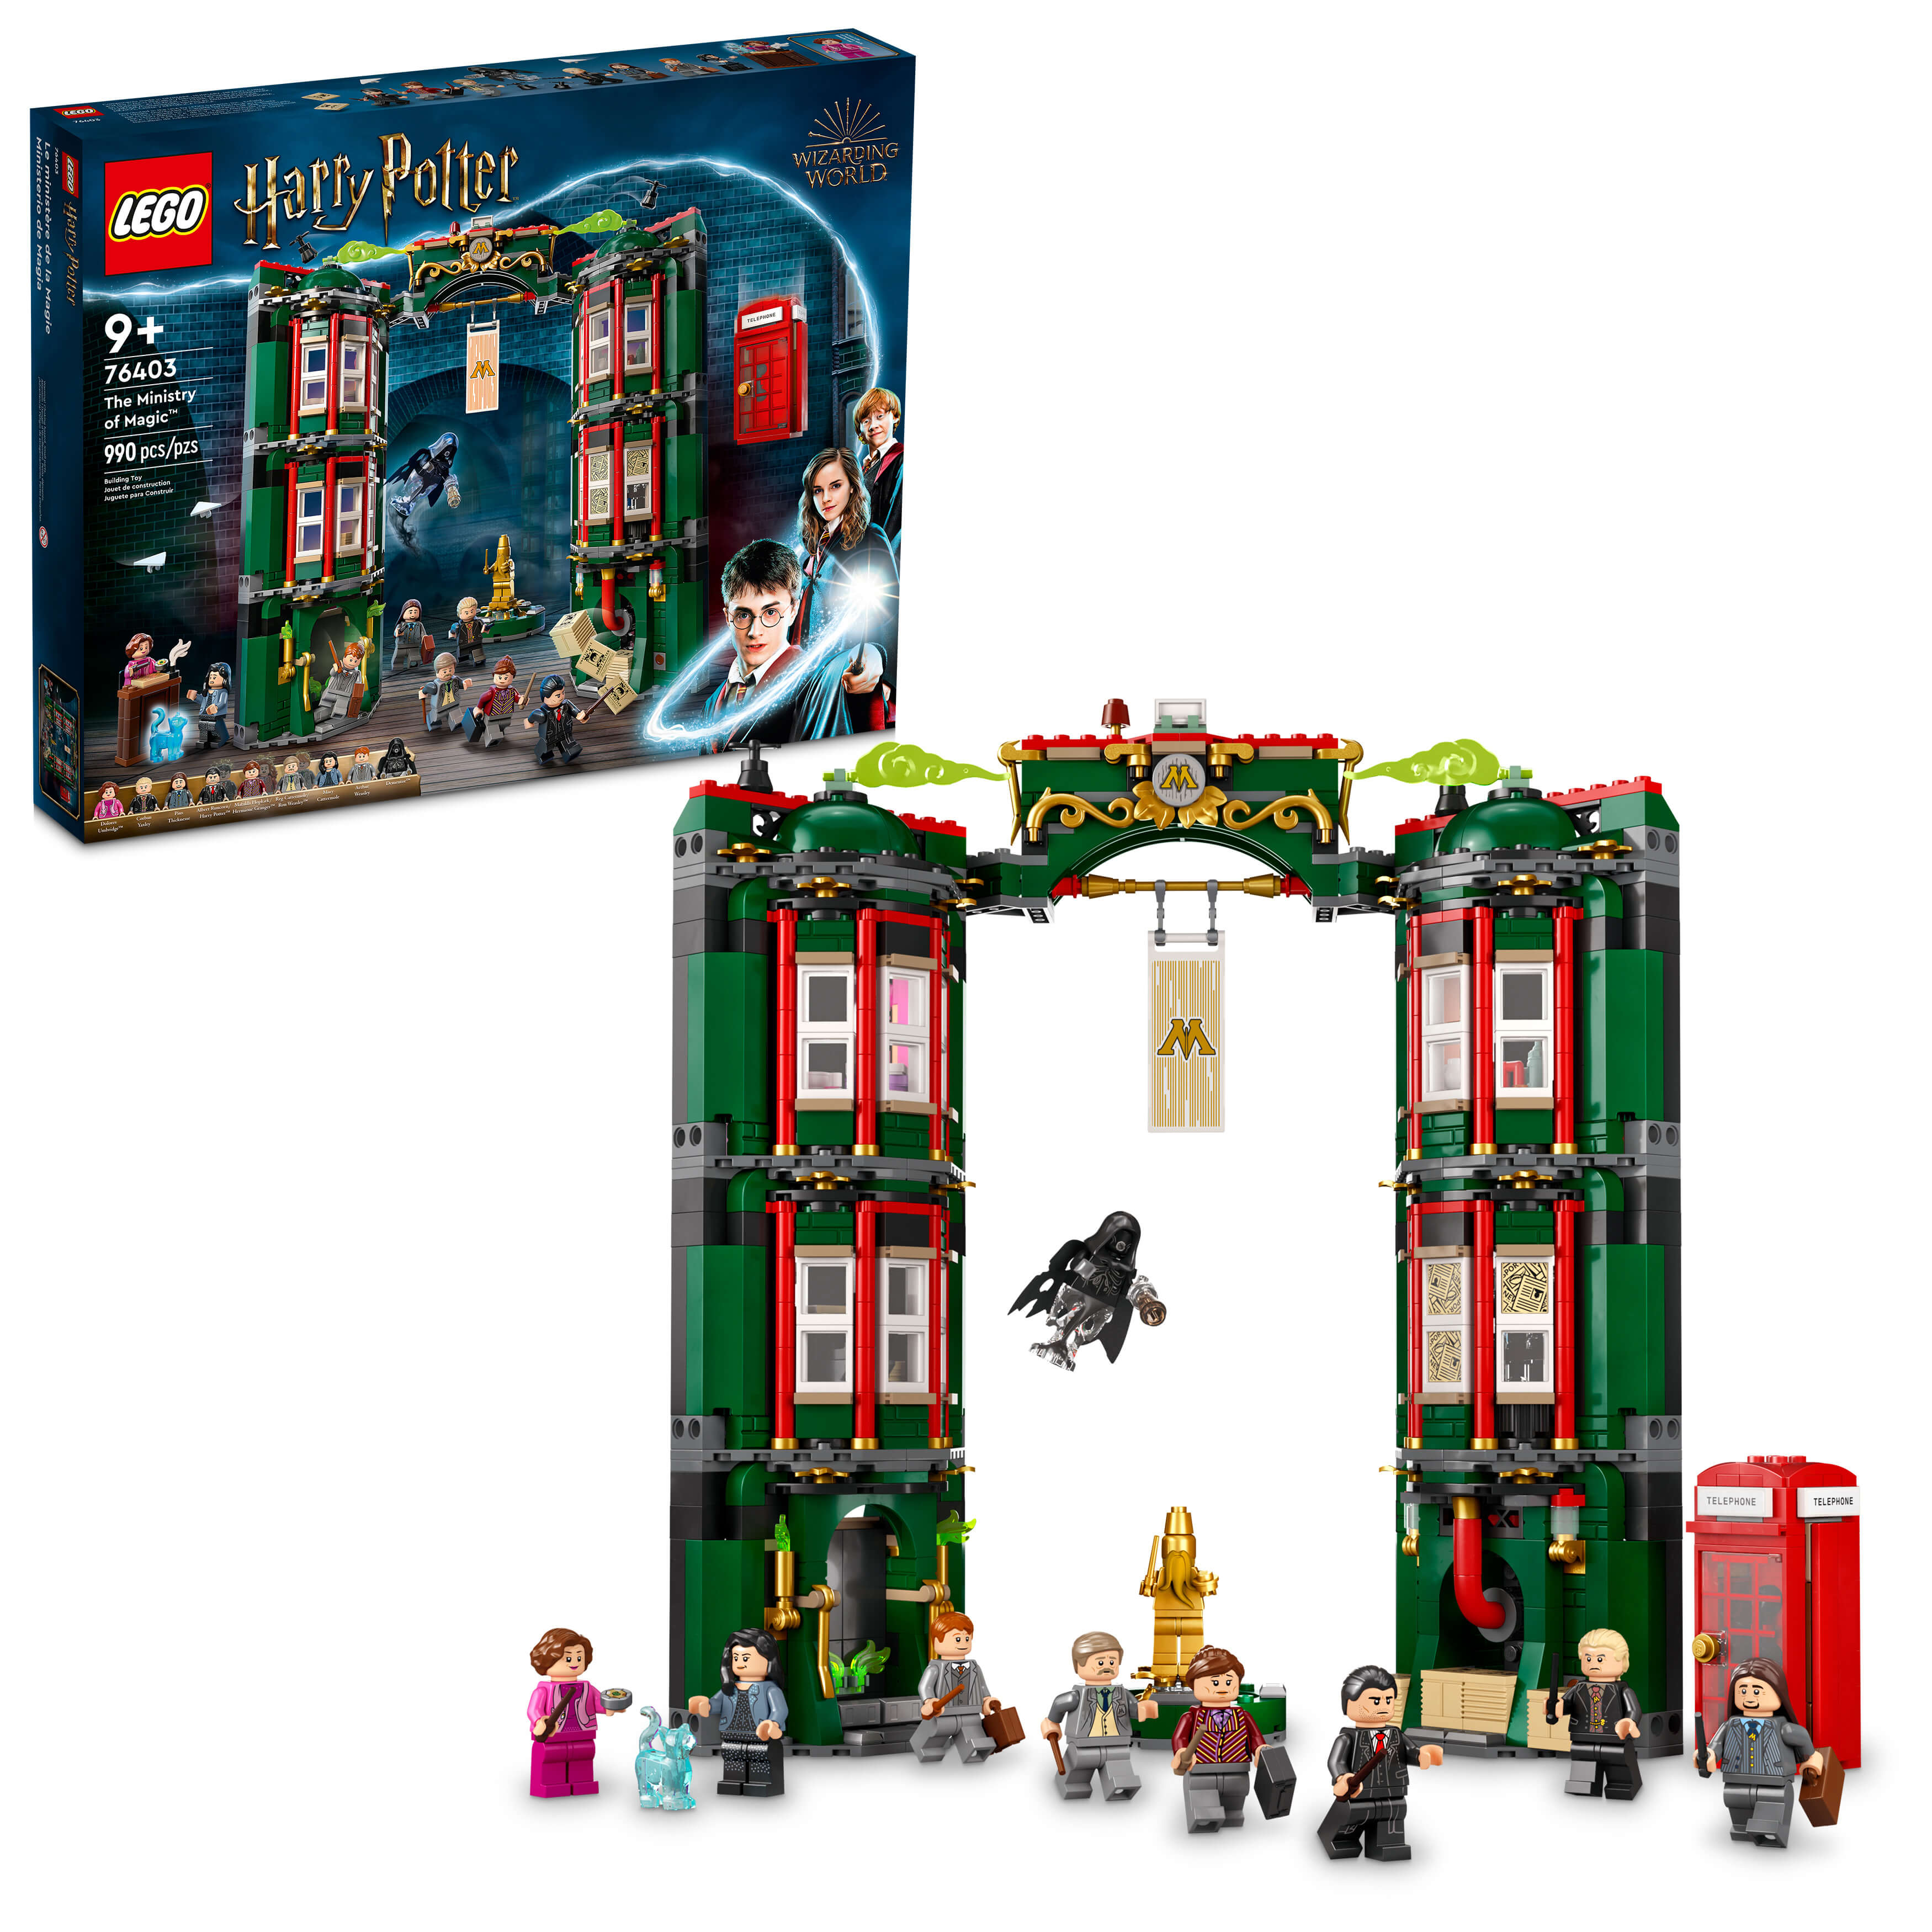 LEGO® Harry Potter® The Ministry of Magic 76403 Building Kit (990 Pieces)